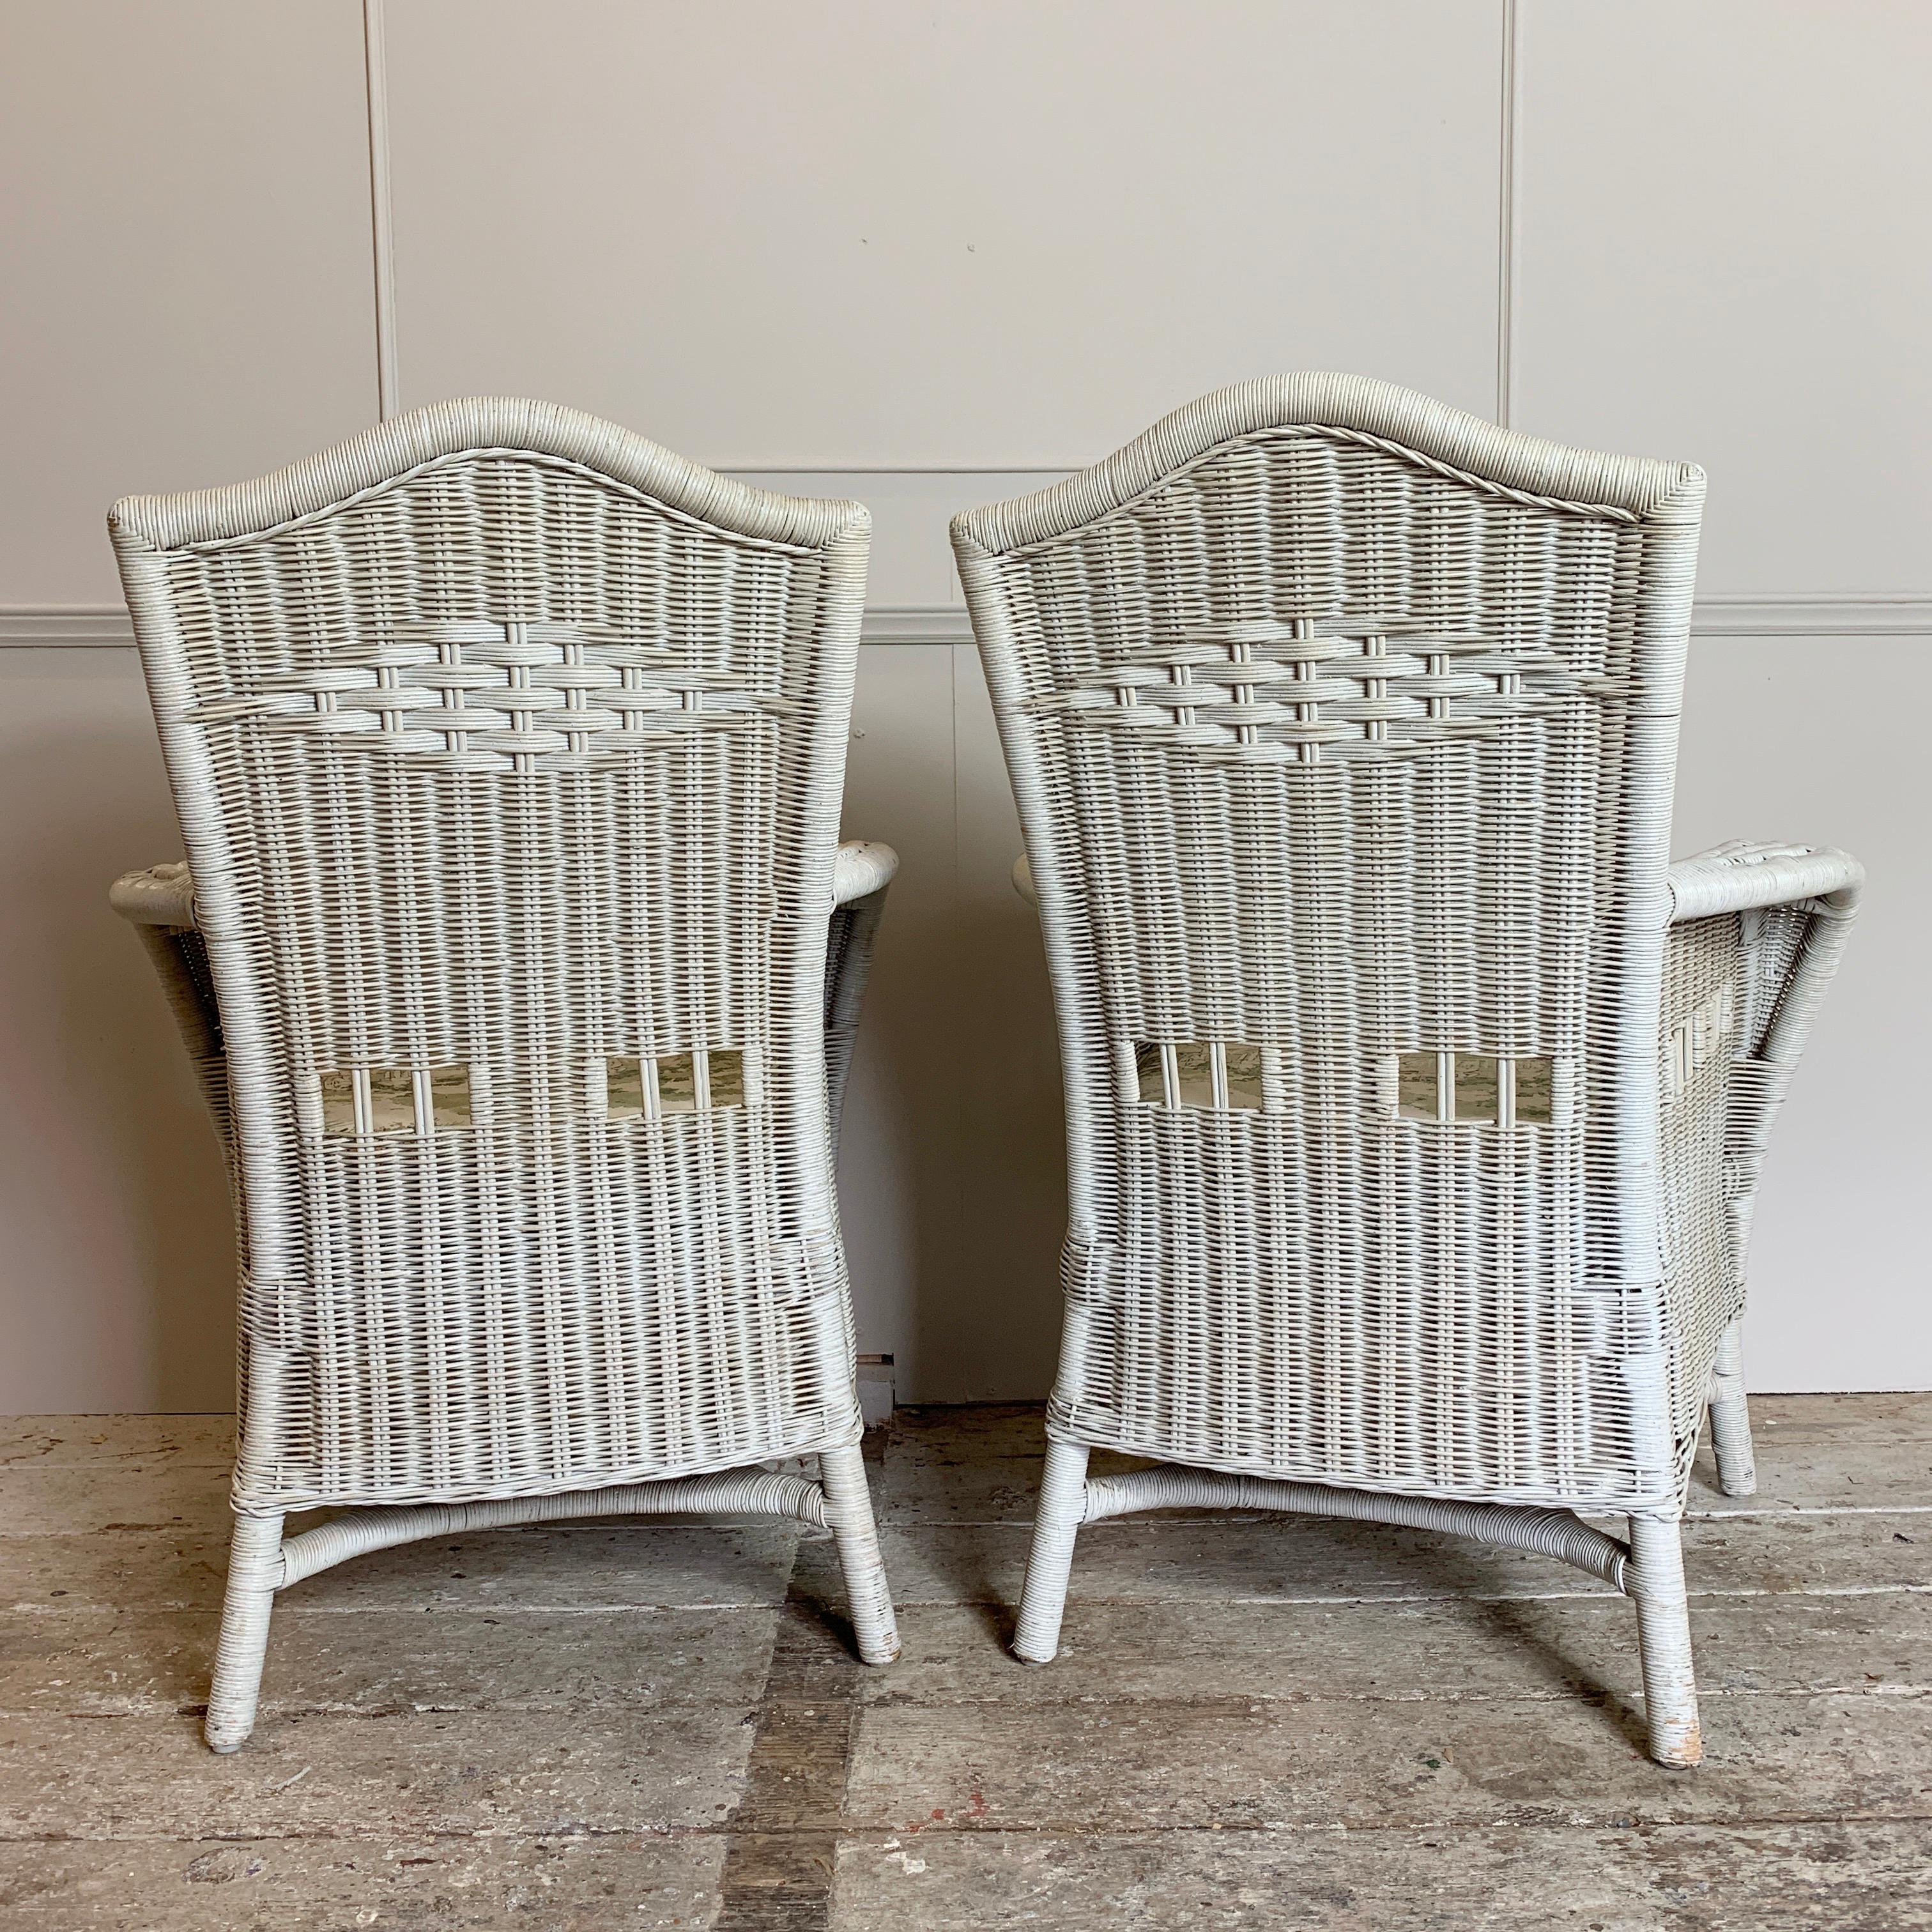 British Henry Link, Wicker Chairs from Wimbledon Lawn Tennis Club, London